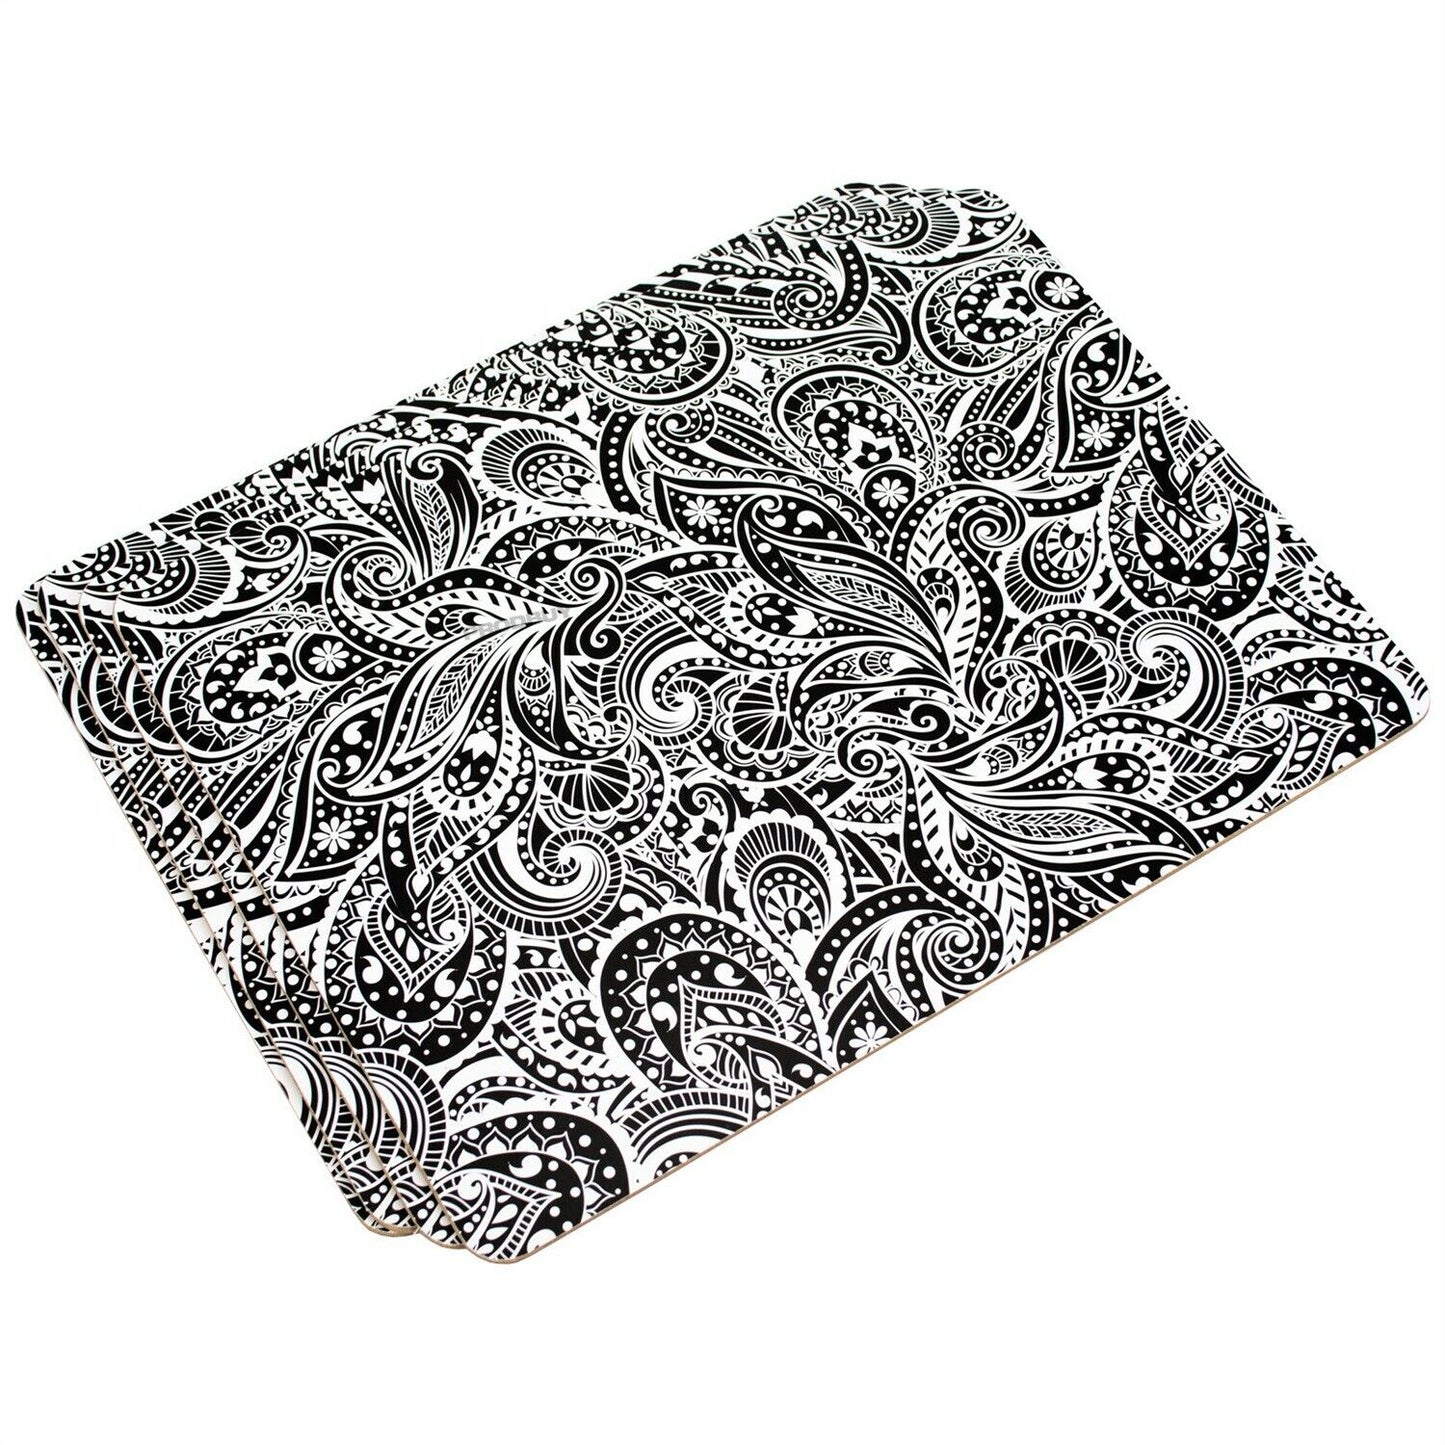 Set of 4 Placemats & 4 Coasters with Black & White Floral Design